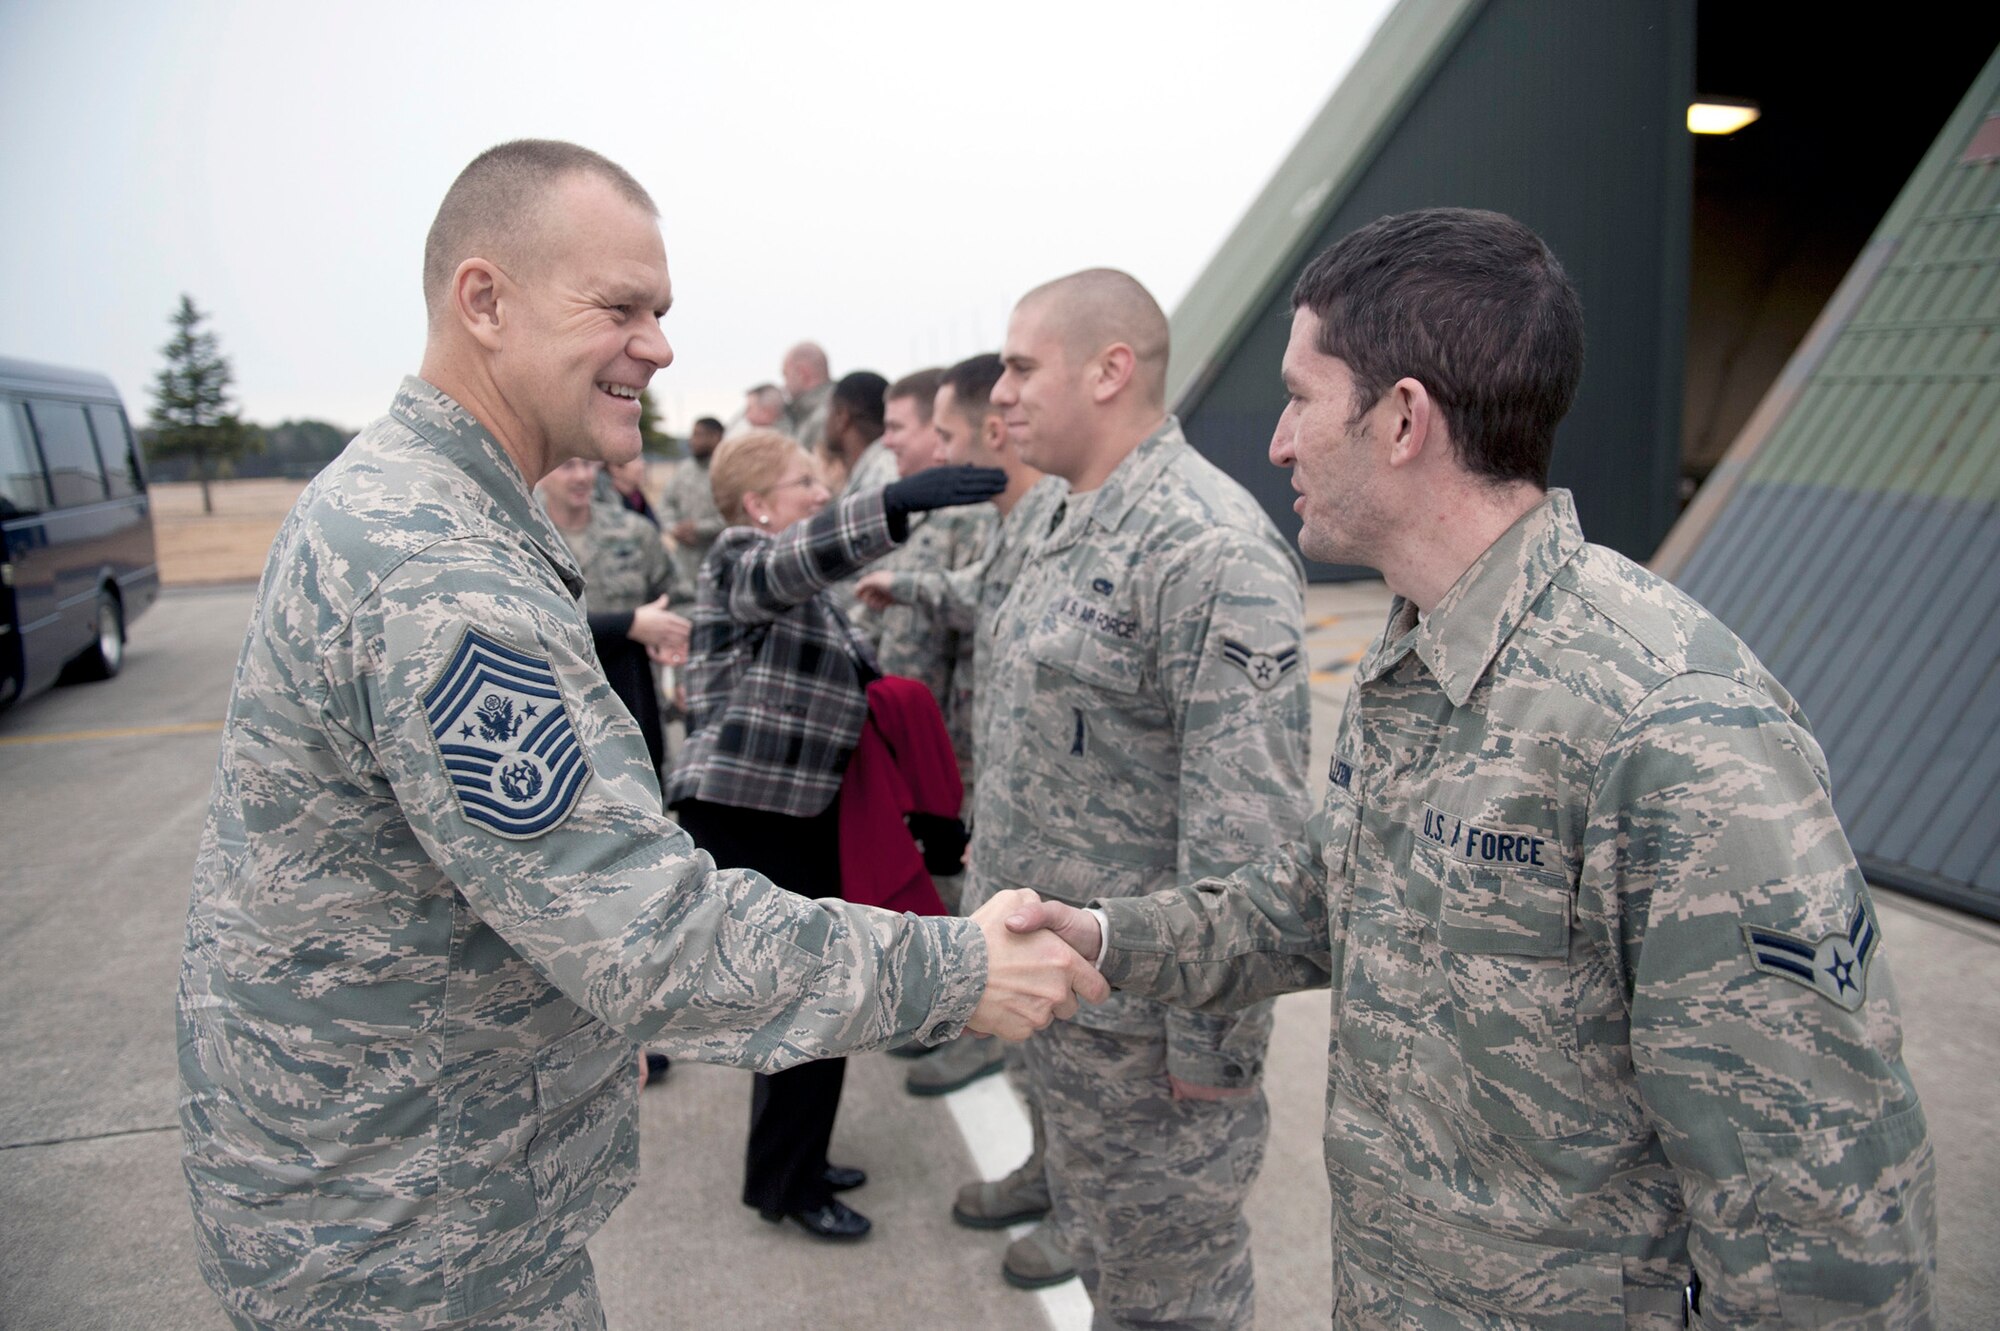 Chief Master Sgt. of the Air Force James A. Roy shakes hands with Airman 1st Class Devin Pellerin Dec. 28, 2010, during a visit to the flightline at Misawa Air Base, Japan. Chief Roy visited a hardened aircraft shelter to meet the maintainers of the 35th Fighter Wing. Airman Pellerin is a 35th Aircraft Maintenance Squadron precision guided munitions crewmember. (U.S. Air Force photo/Staff Sgt. Samuel Morse)